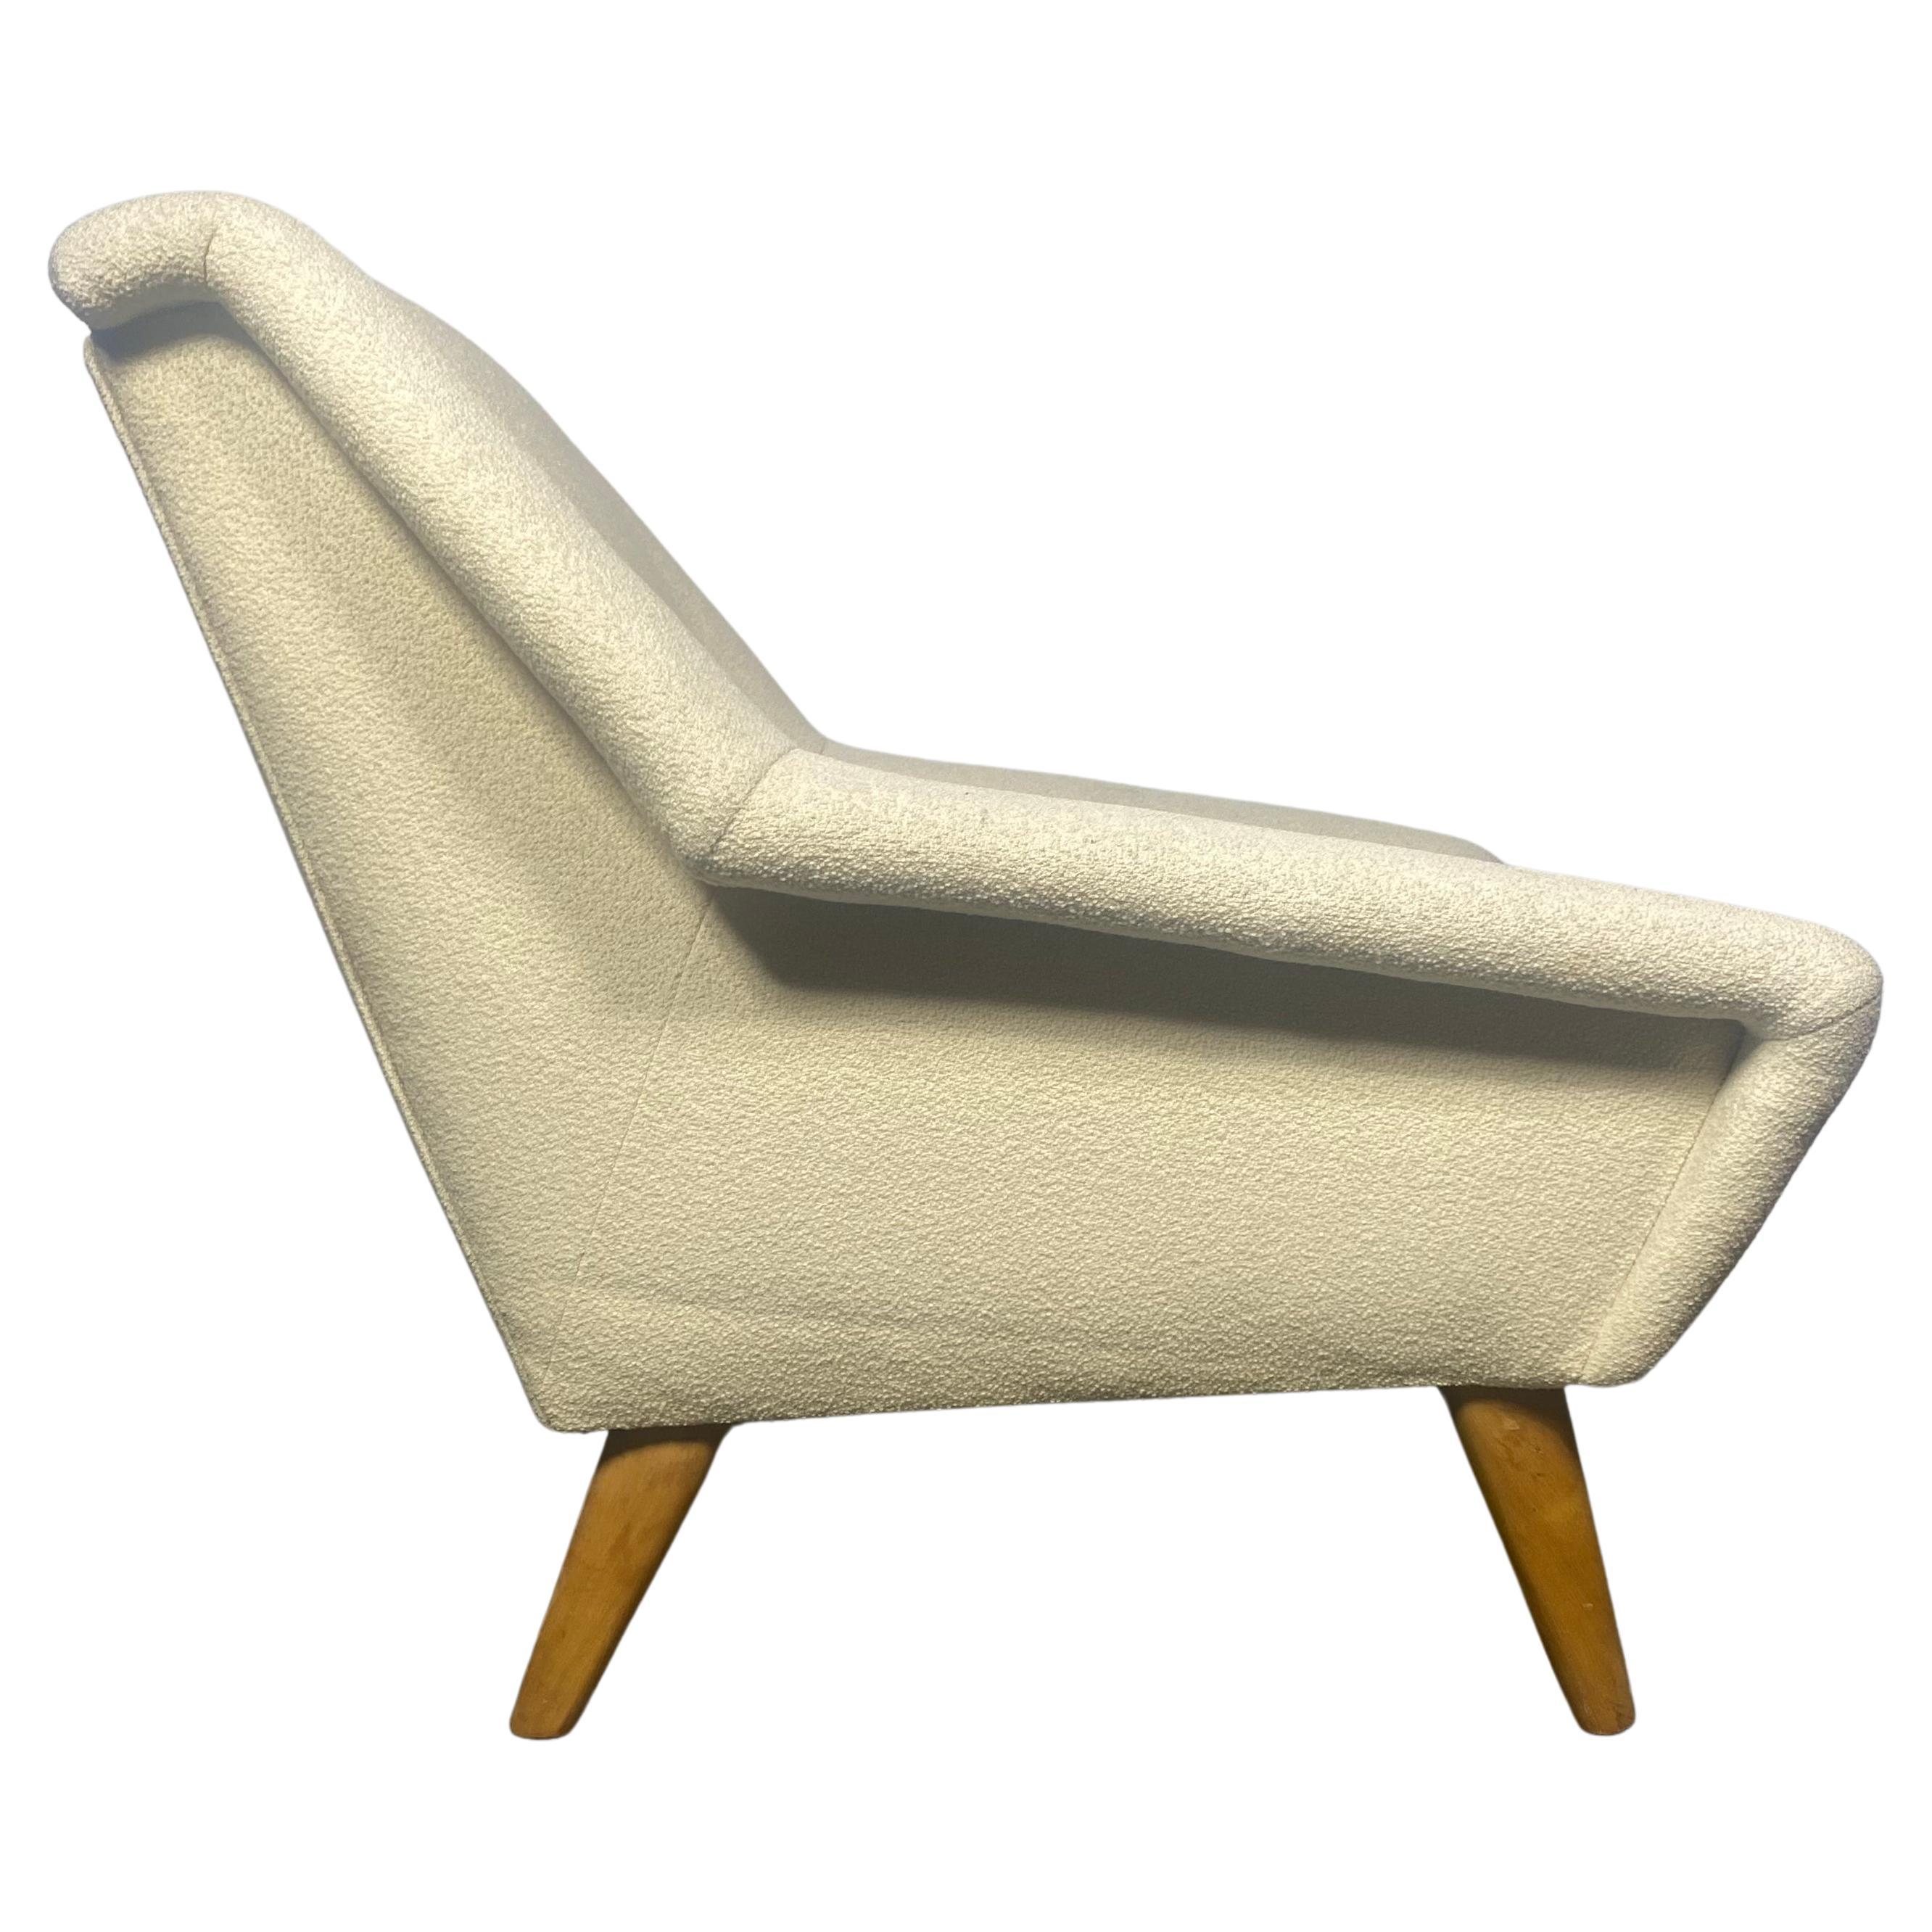 Classic Modernist Lounge Chair by Heywood Wakefield , after Gio Ponti For Sale